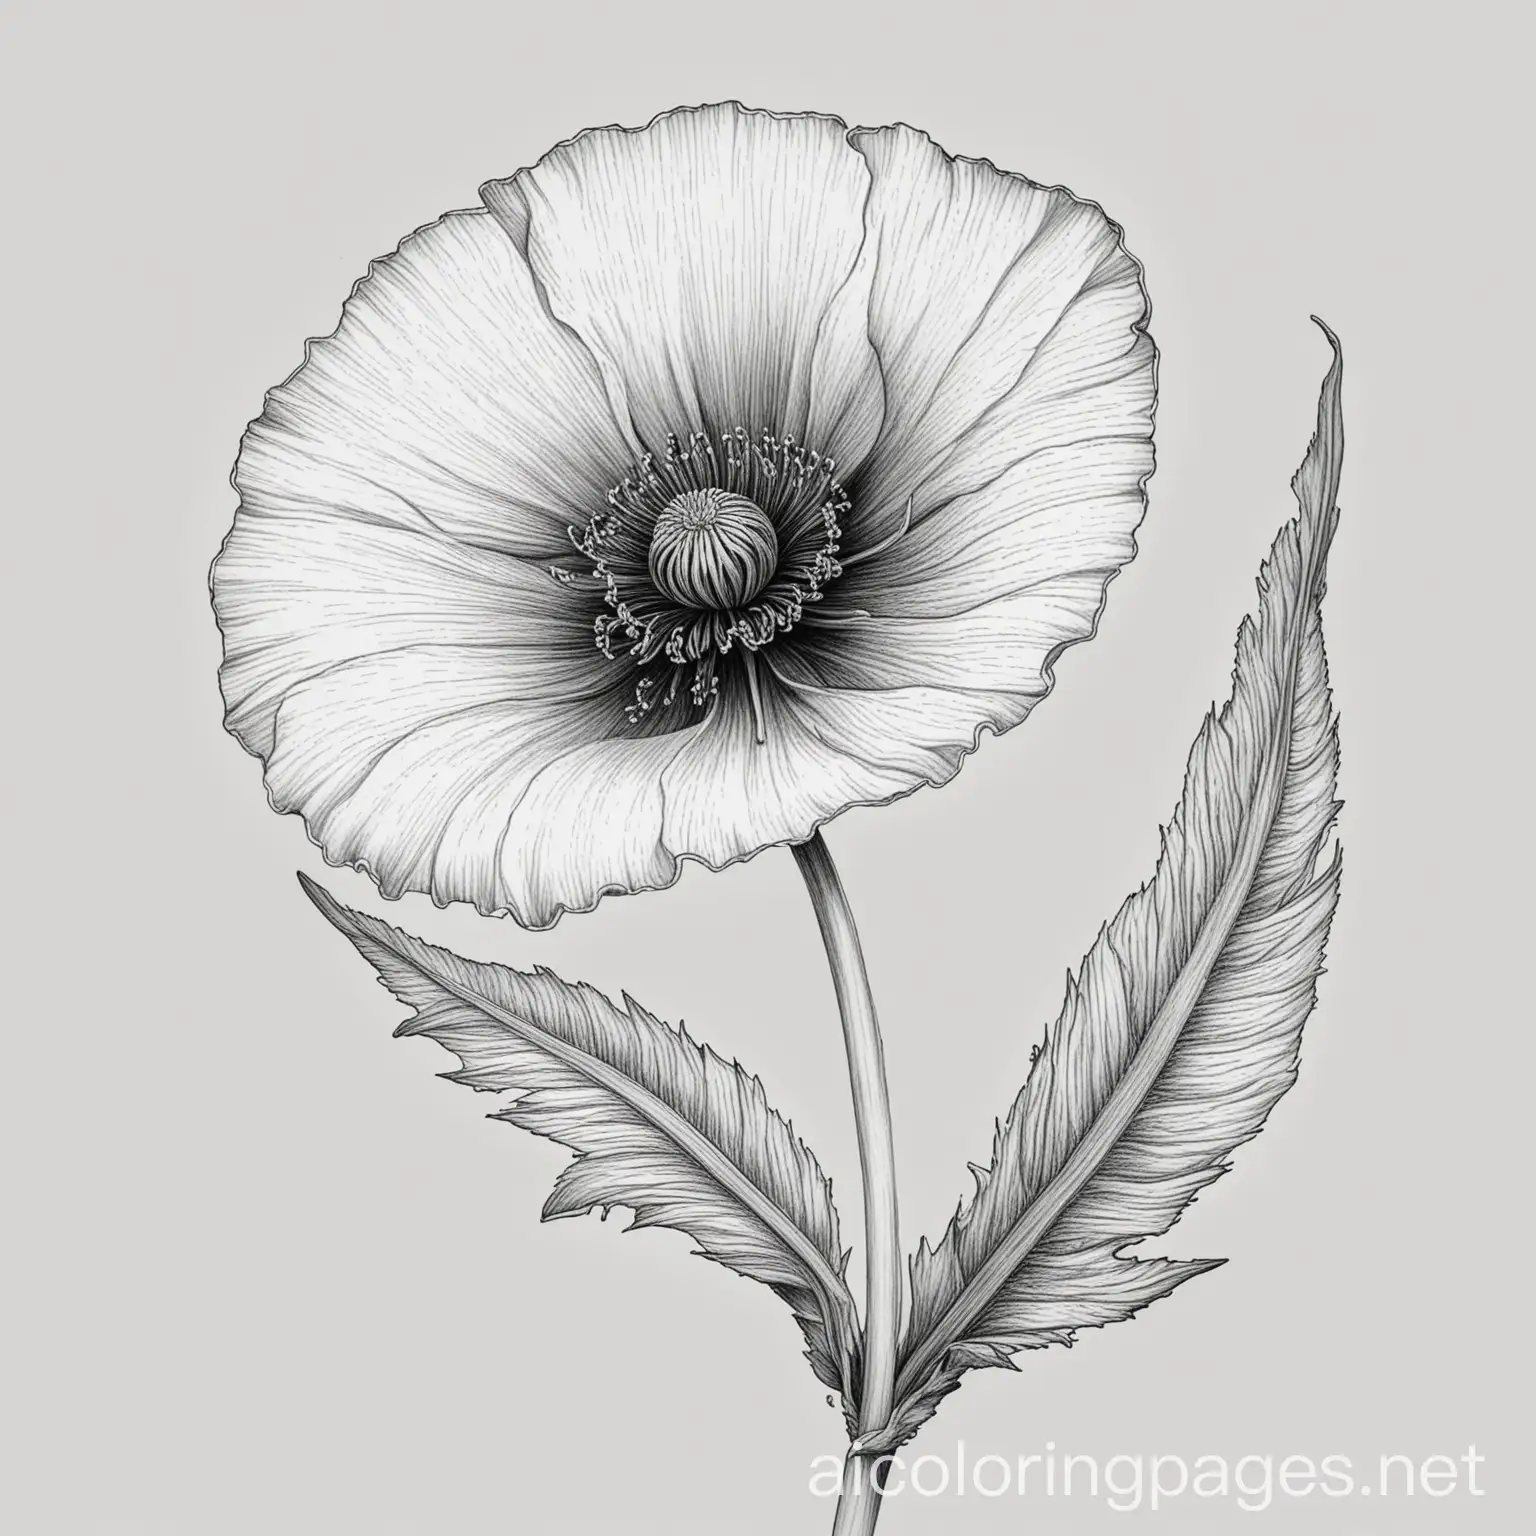 xaguigi poppy plaitaims, Coloring Page, black and white, line art, white background, Simplicity, Ample White Space. The background of the coloring page is plain white to make it easy for young children to color within the lines. The outlines of all the subjects are easy to distinguish, making it simple for kids to color without too much difficulty